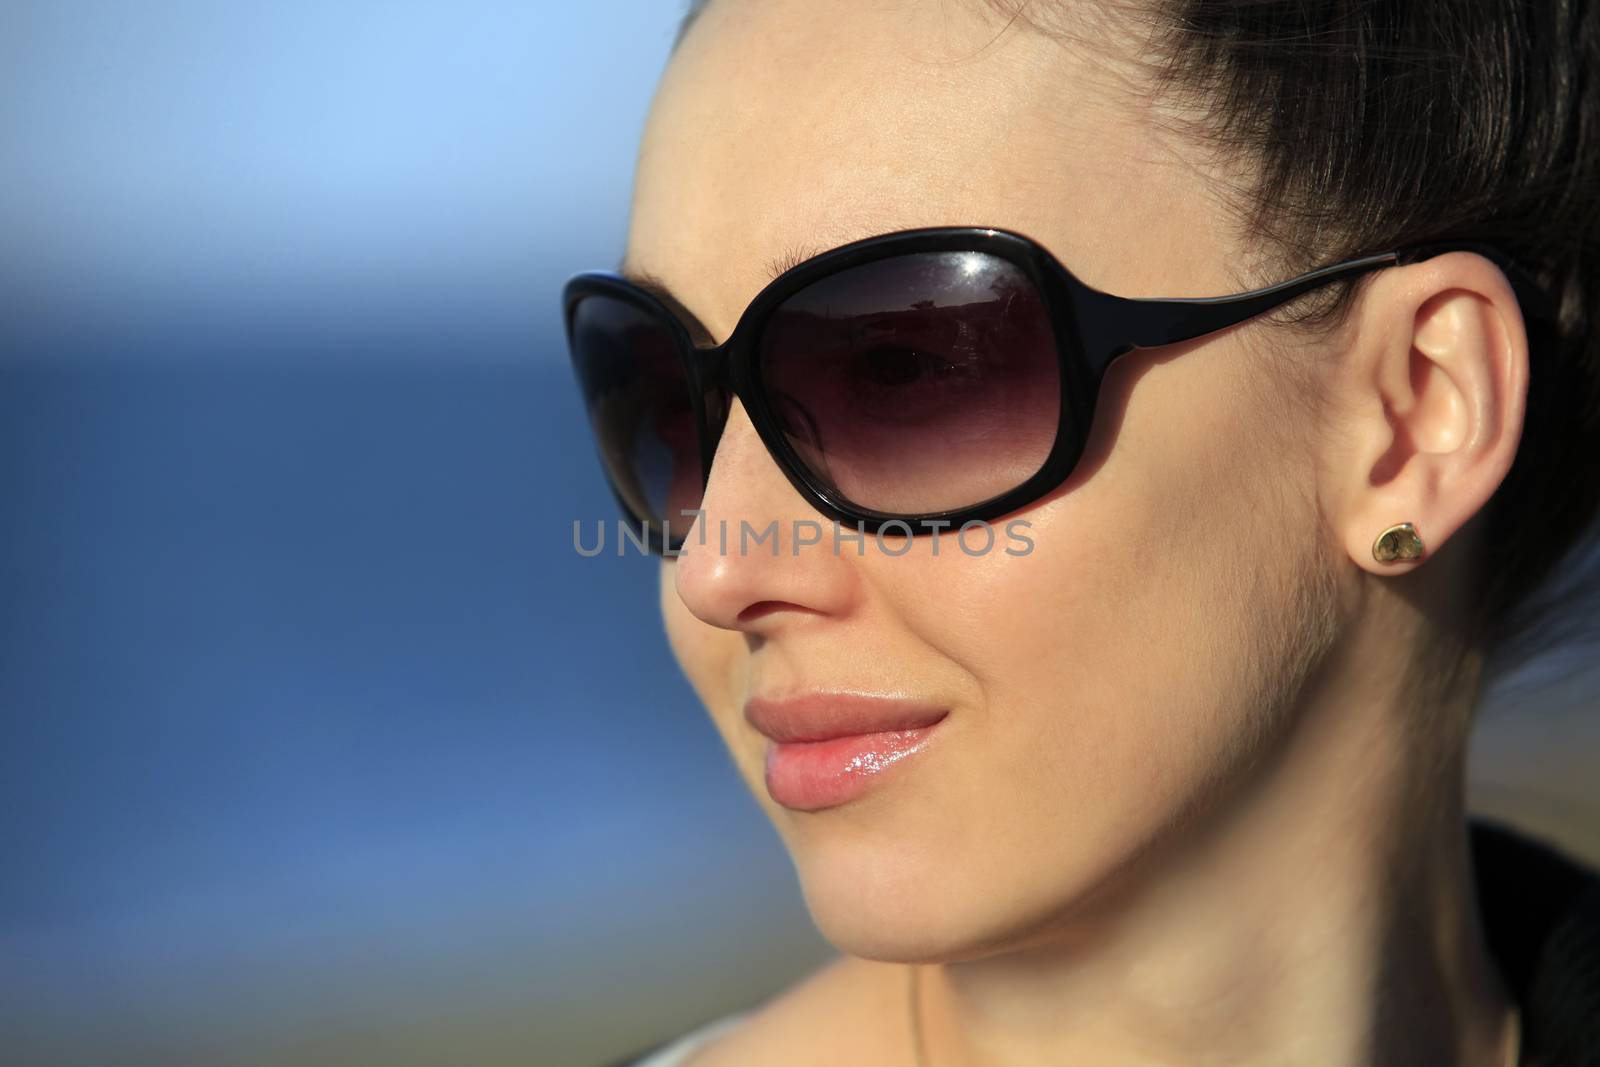 The girl with smile in solar glasses